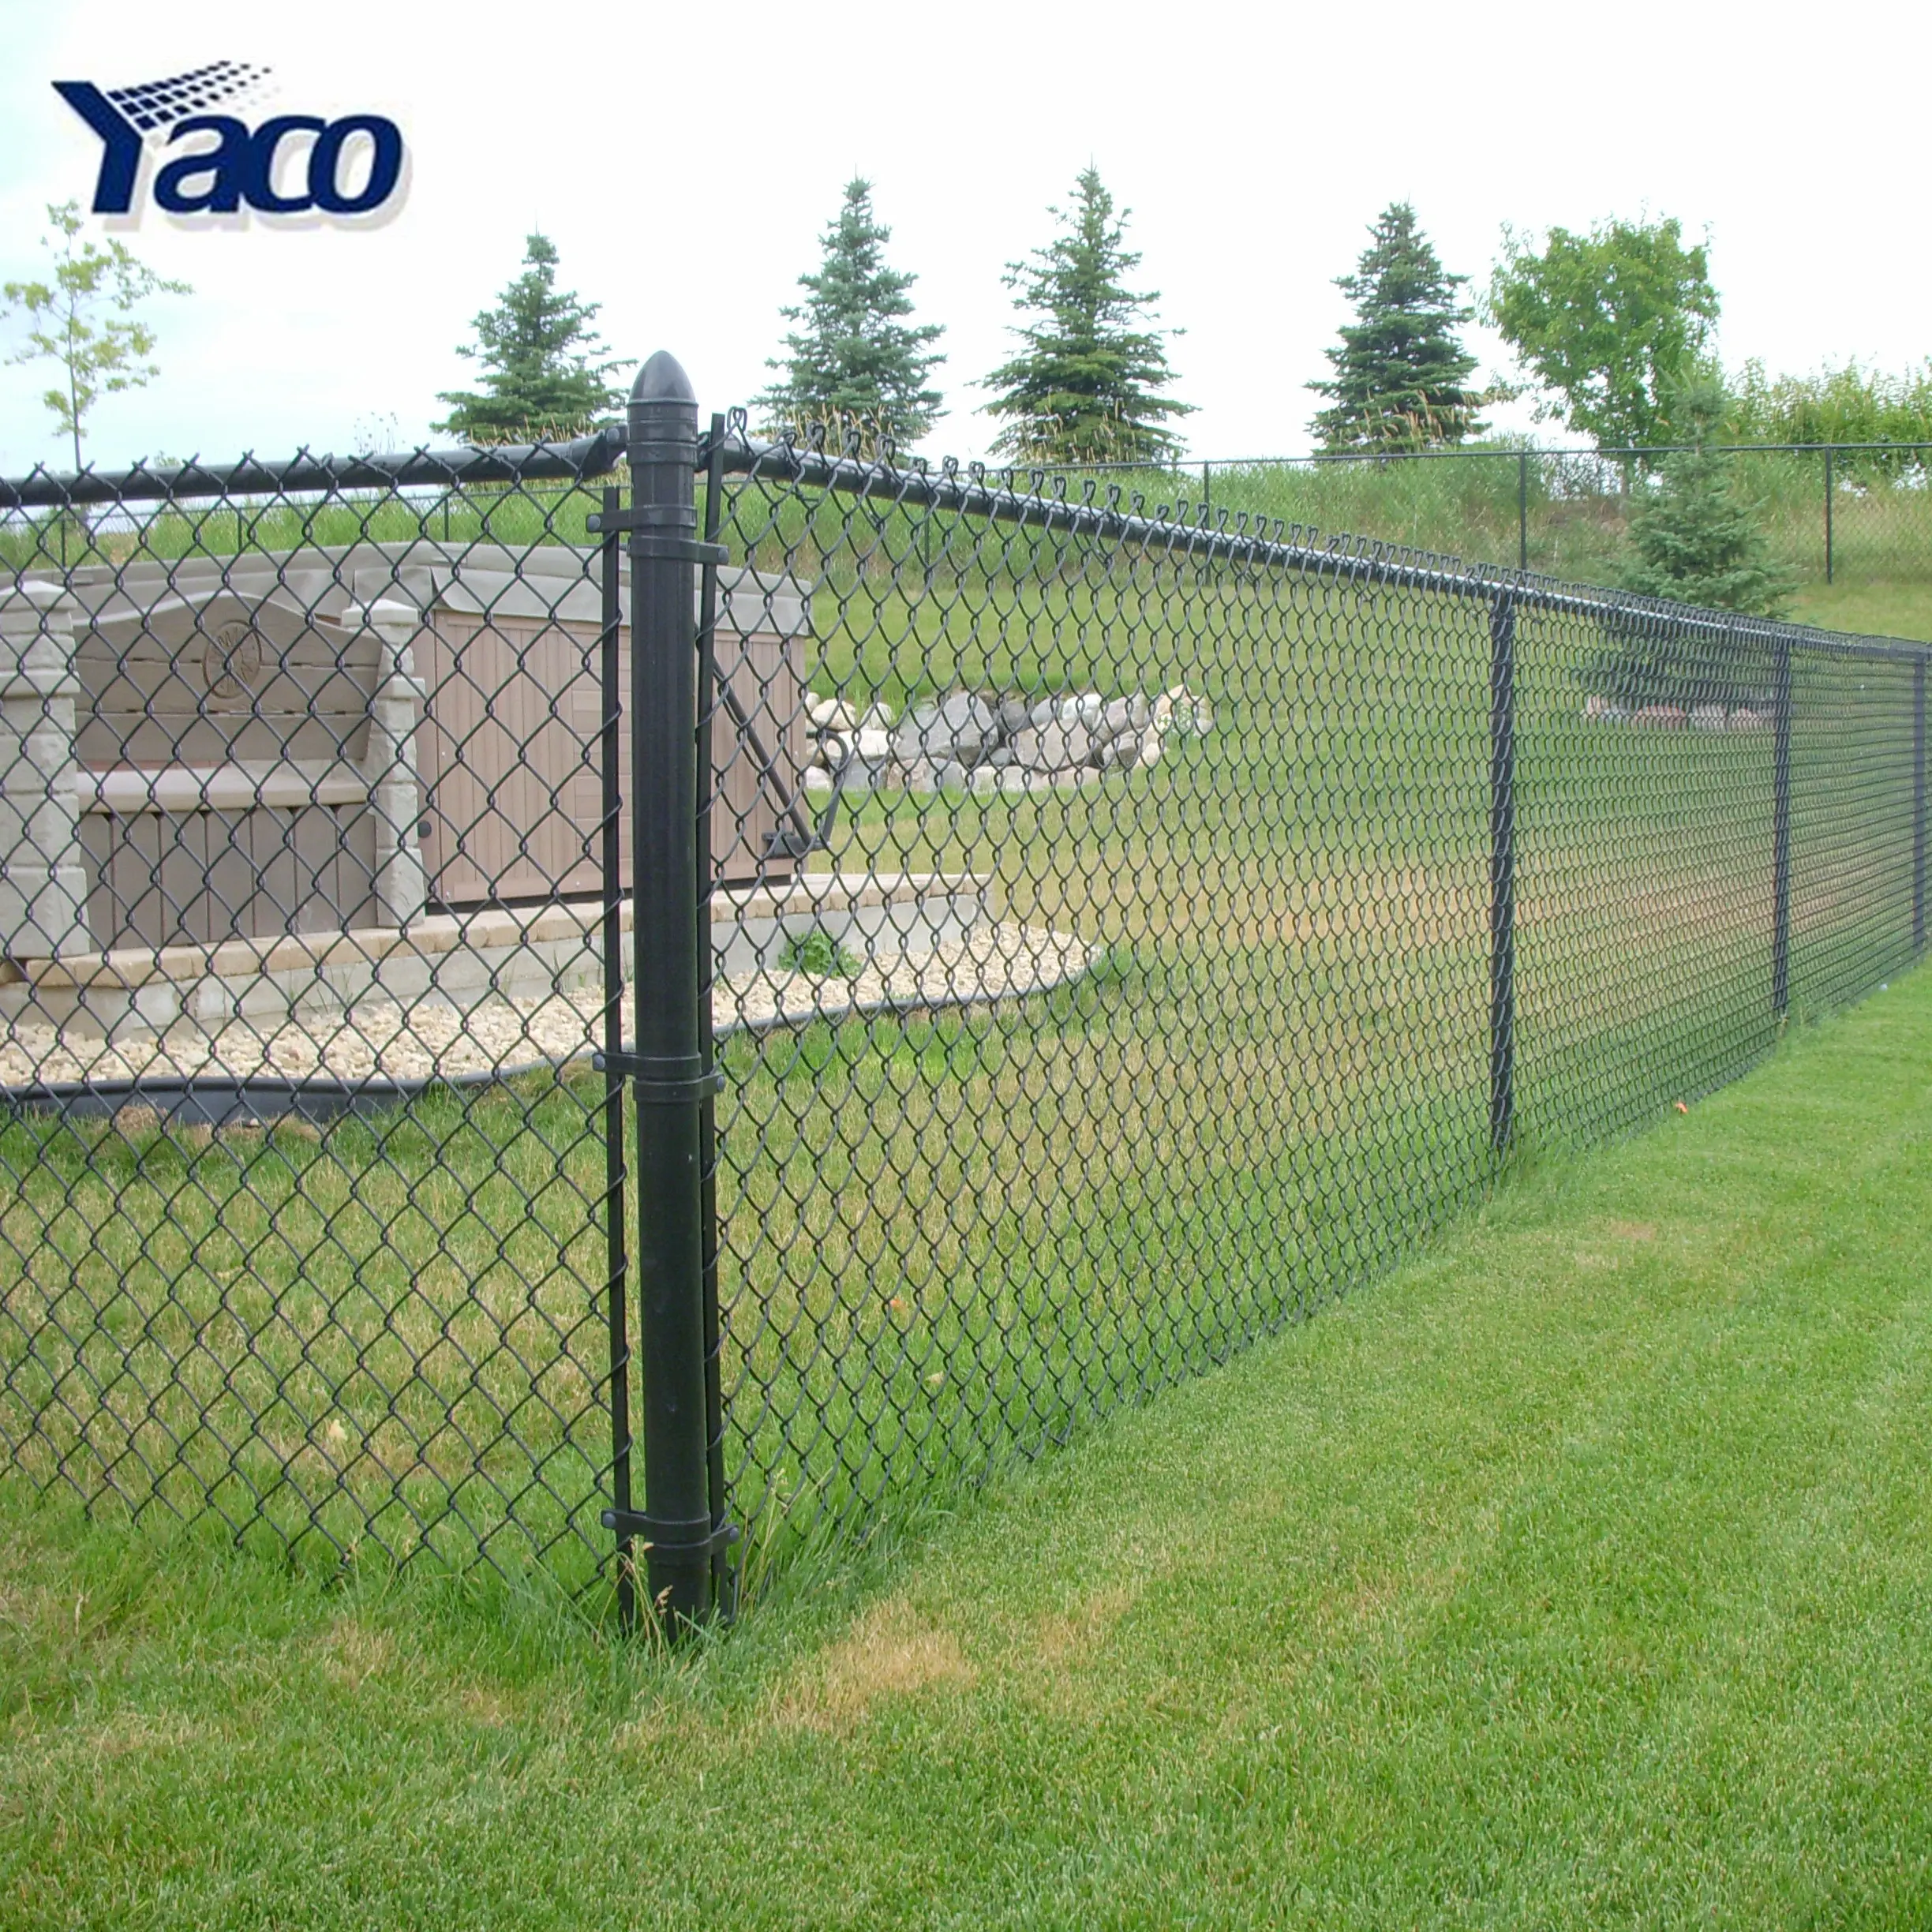 9 gauge 6ft x 50ft roll chain link fence hot sale hot dipped galvanized iron chain link fence decorative